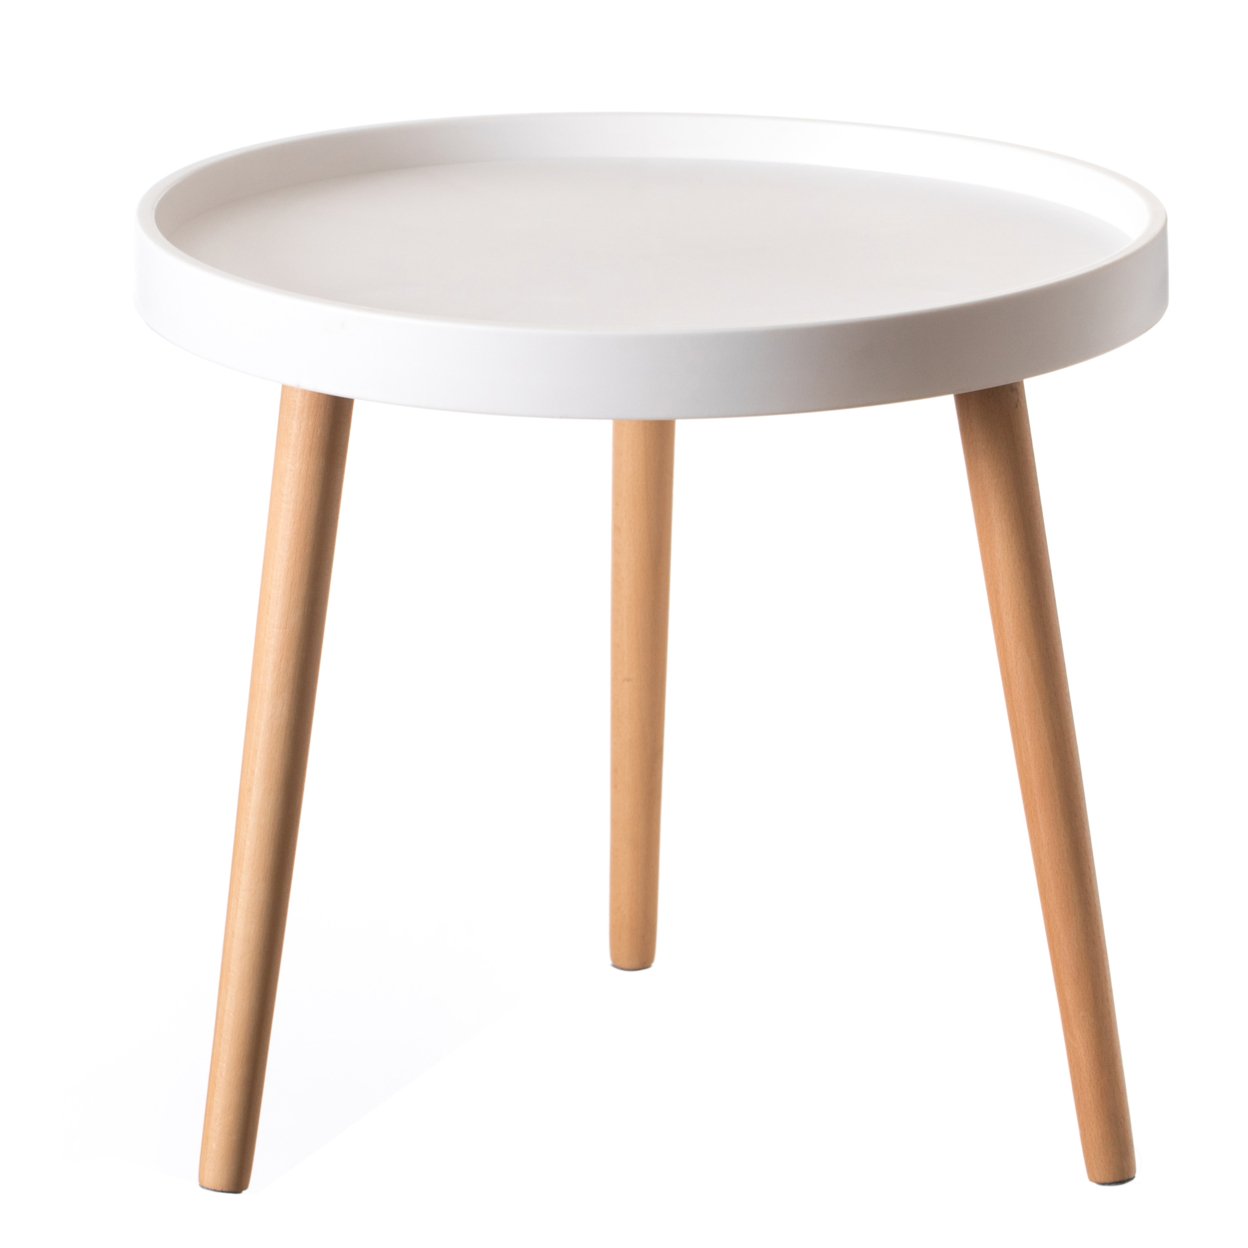 Modern Plastic Round Side Table Accent Coffee Table With Beech Wood Legs - Black